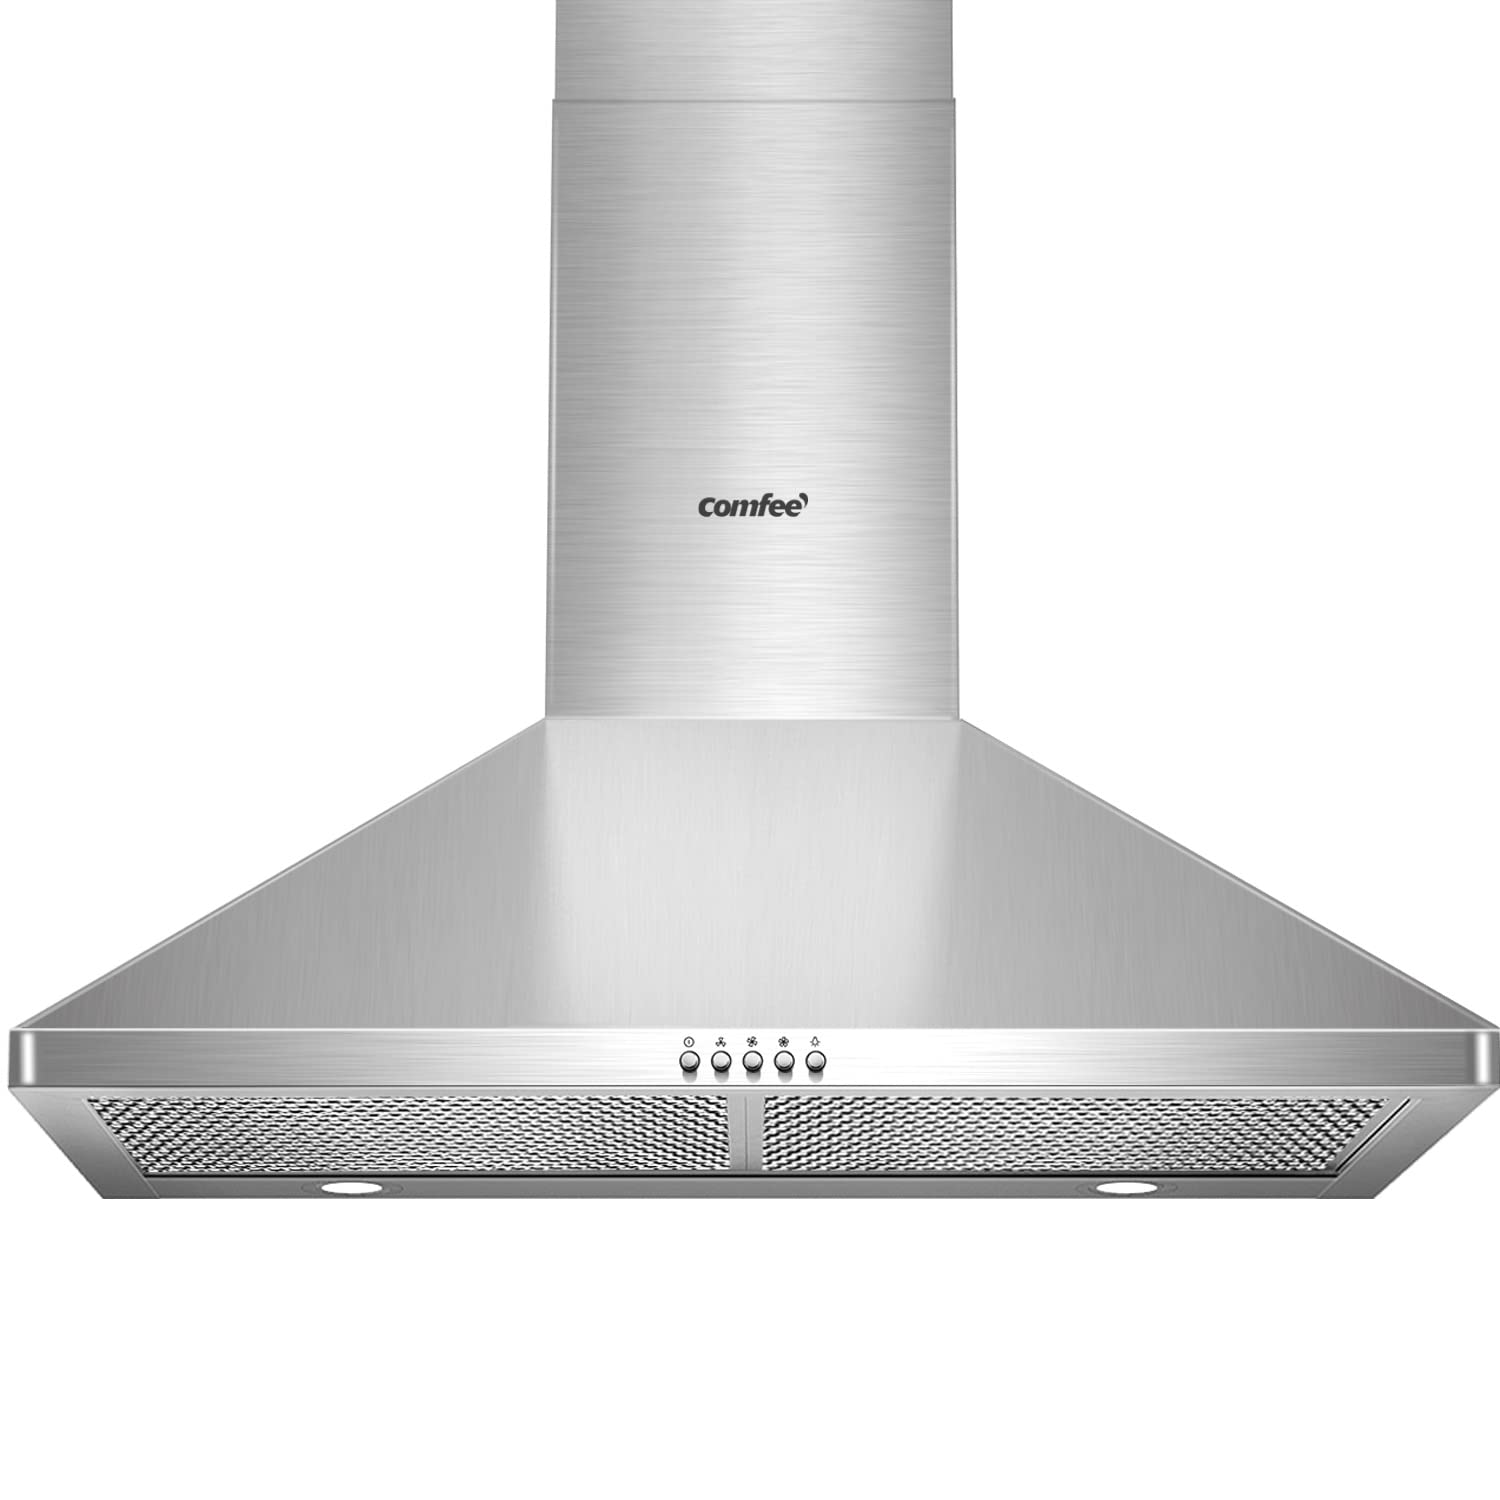 COMFEE' CVP30W6AST Ducted Pyramid Range 450 CFM Stainless Steel Wall Mount Vent Hood with 3 Speed Exhaust Fan, 5-Layer Aluminum Permanent Filters, Two LED Lights, Convertible to Ductless, 30 inches